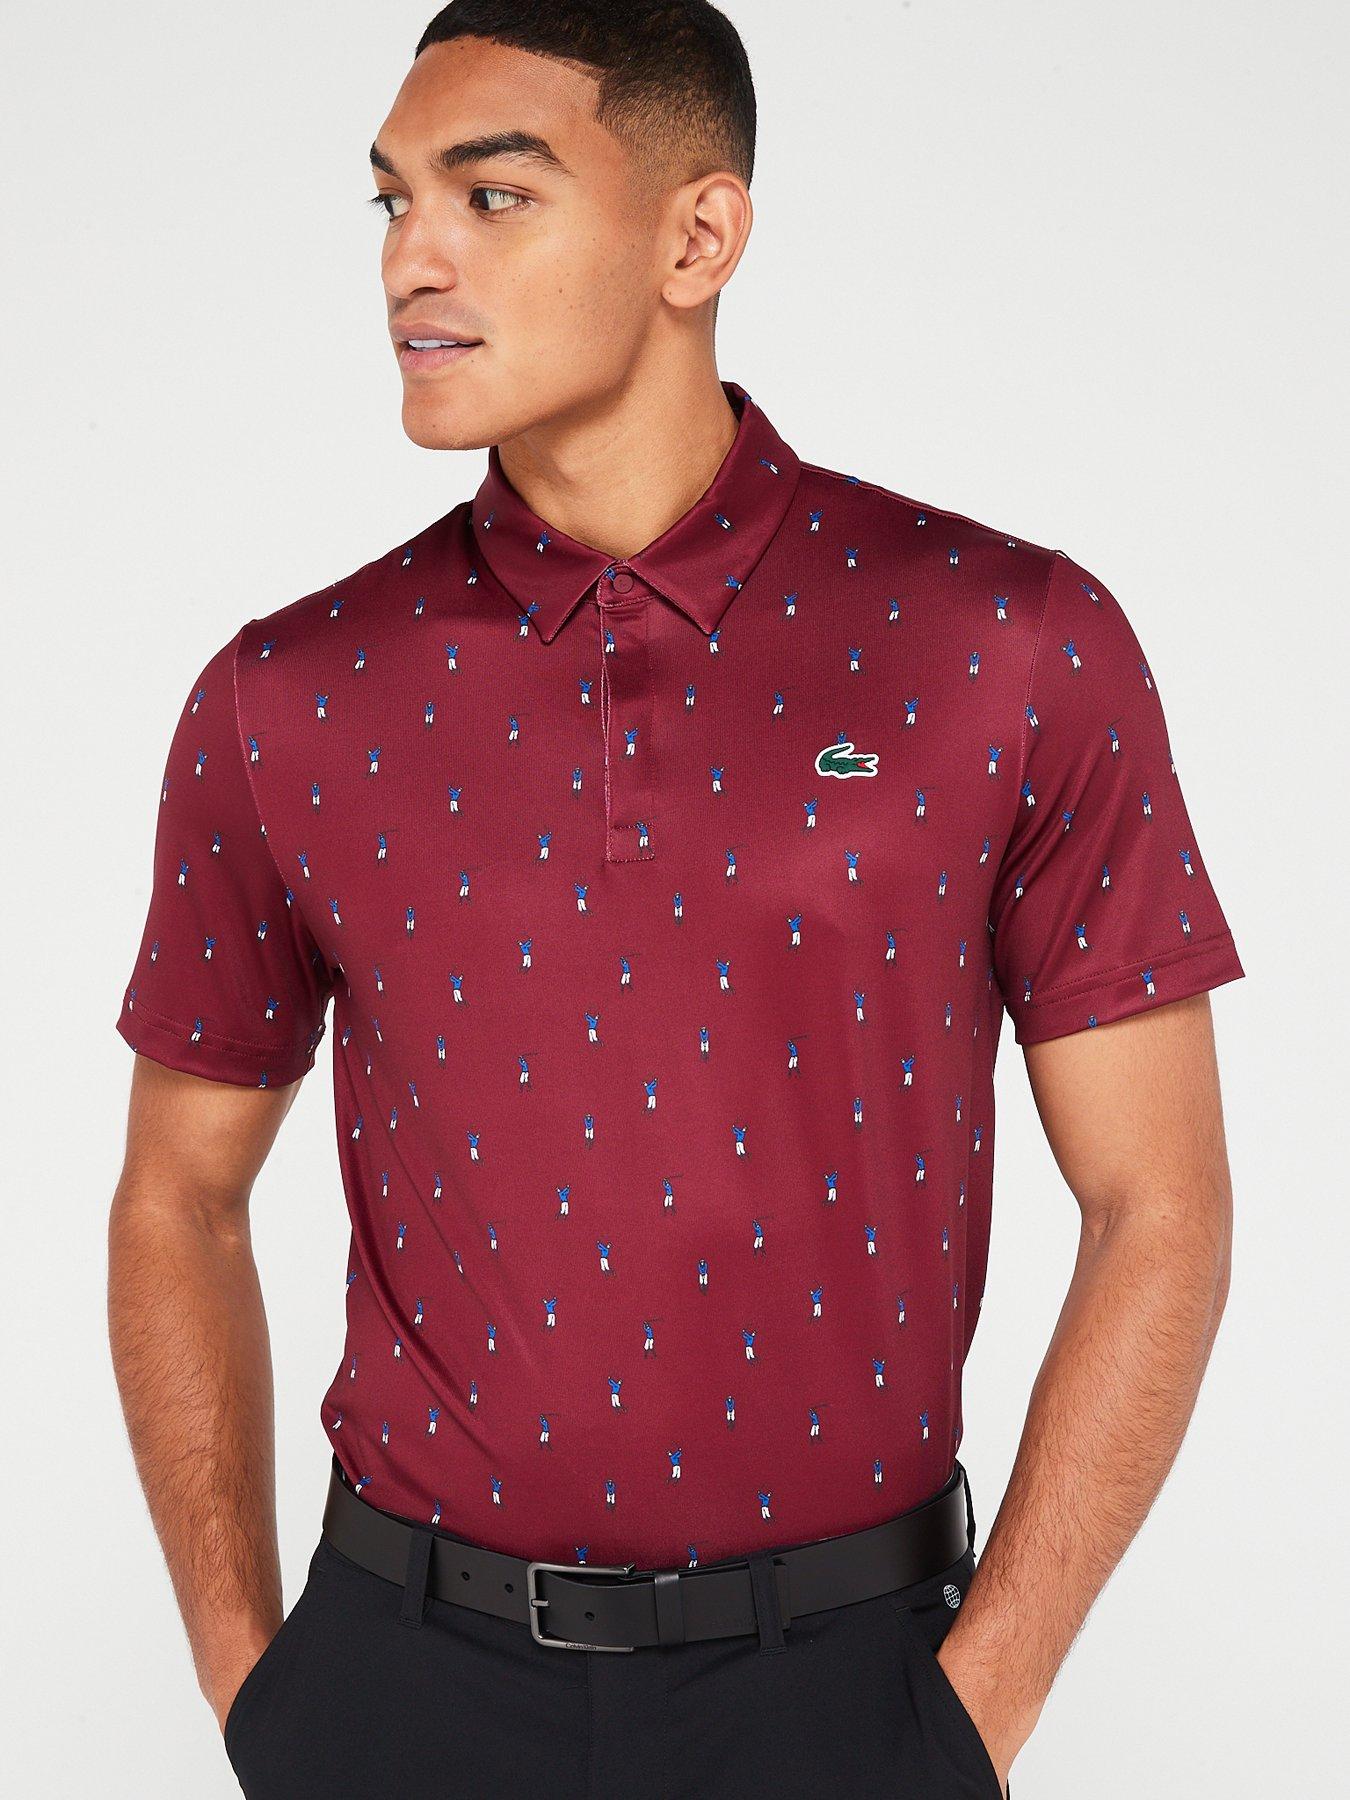 Lacoste Golf Shirts